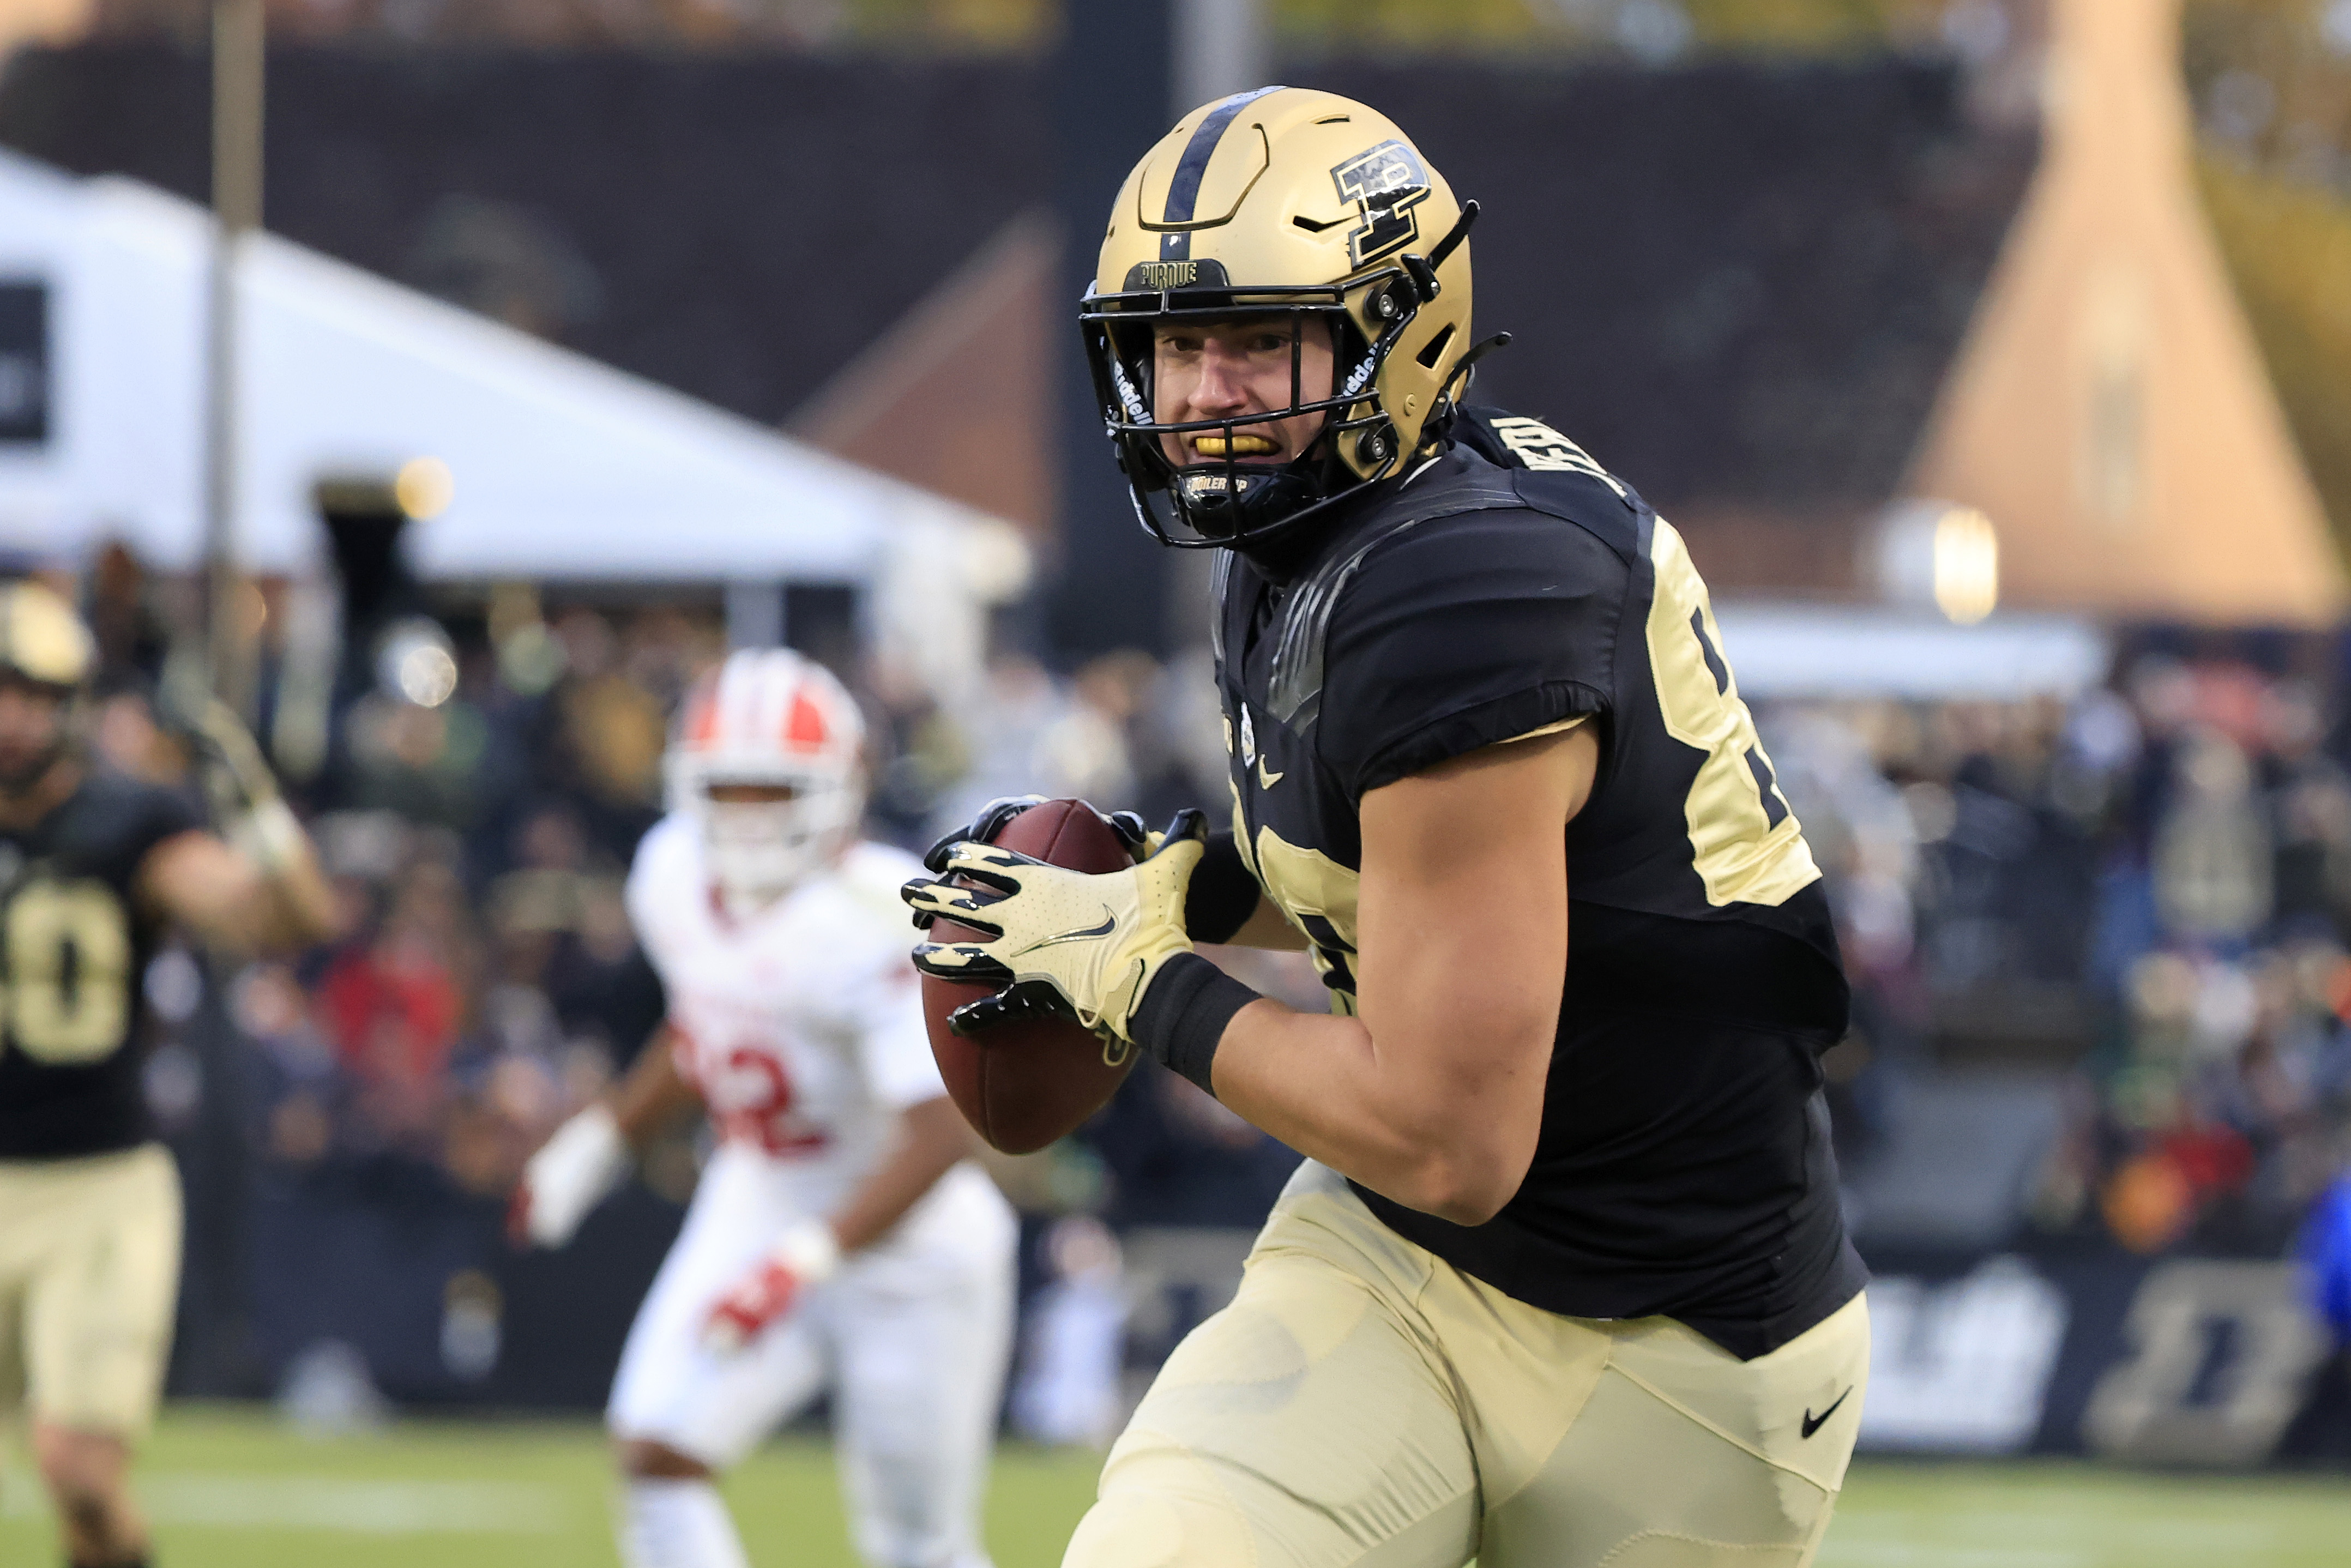 Music City Bowl 2021: Tennessee vs Purdue Date, Time, TV, Weather & History for NCAAF Game